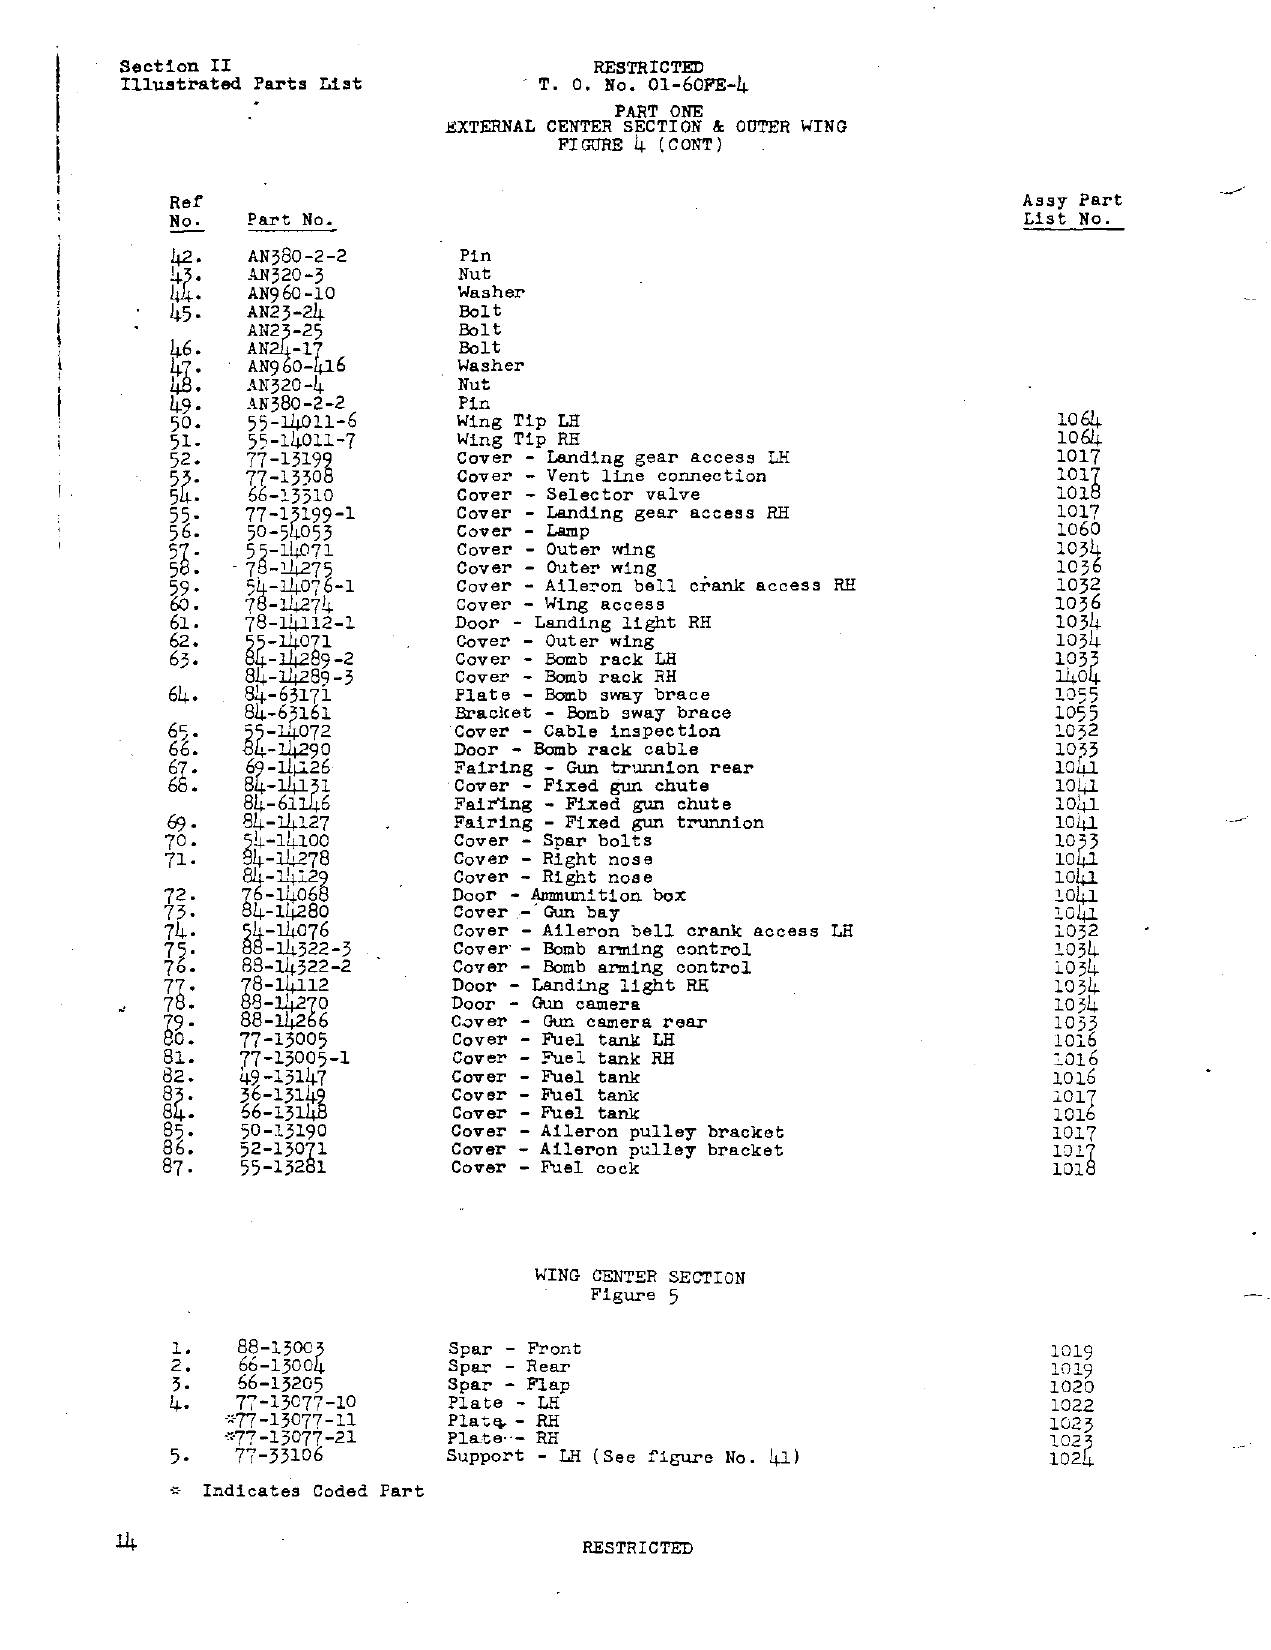 Sample page 8 from AirCorps Library document: Illustrated Parts Catalog for AT-6C and SNJ-4 Airplanes 